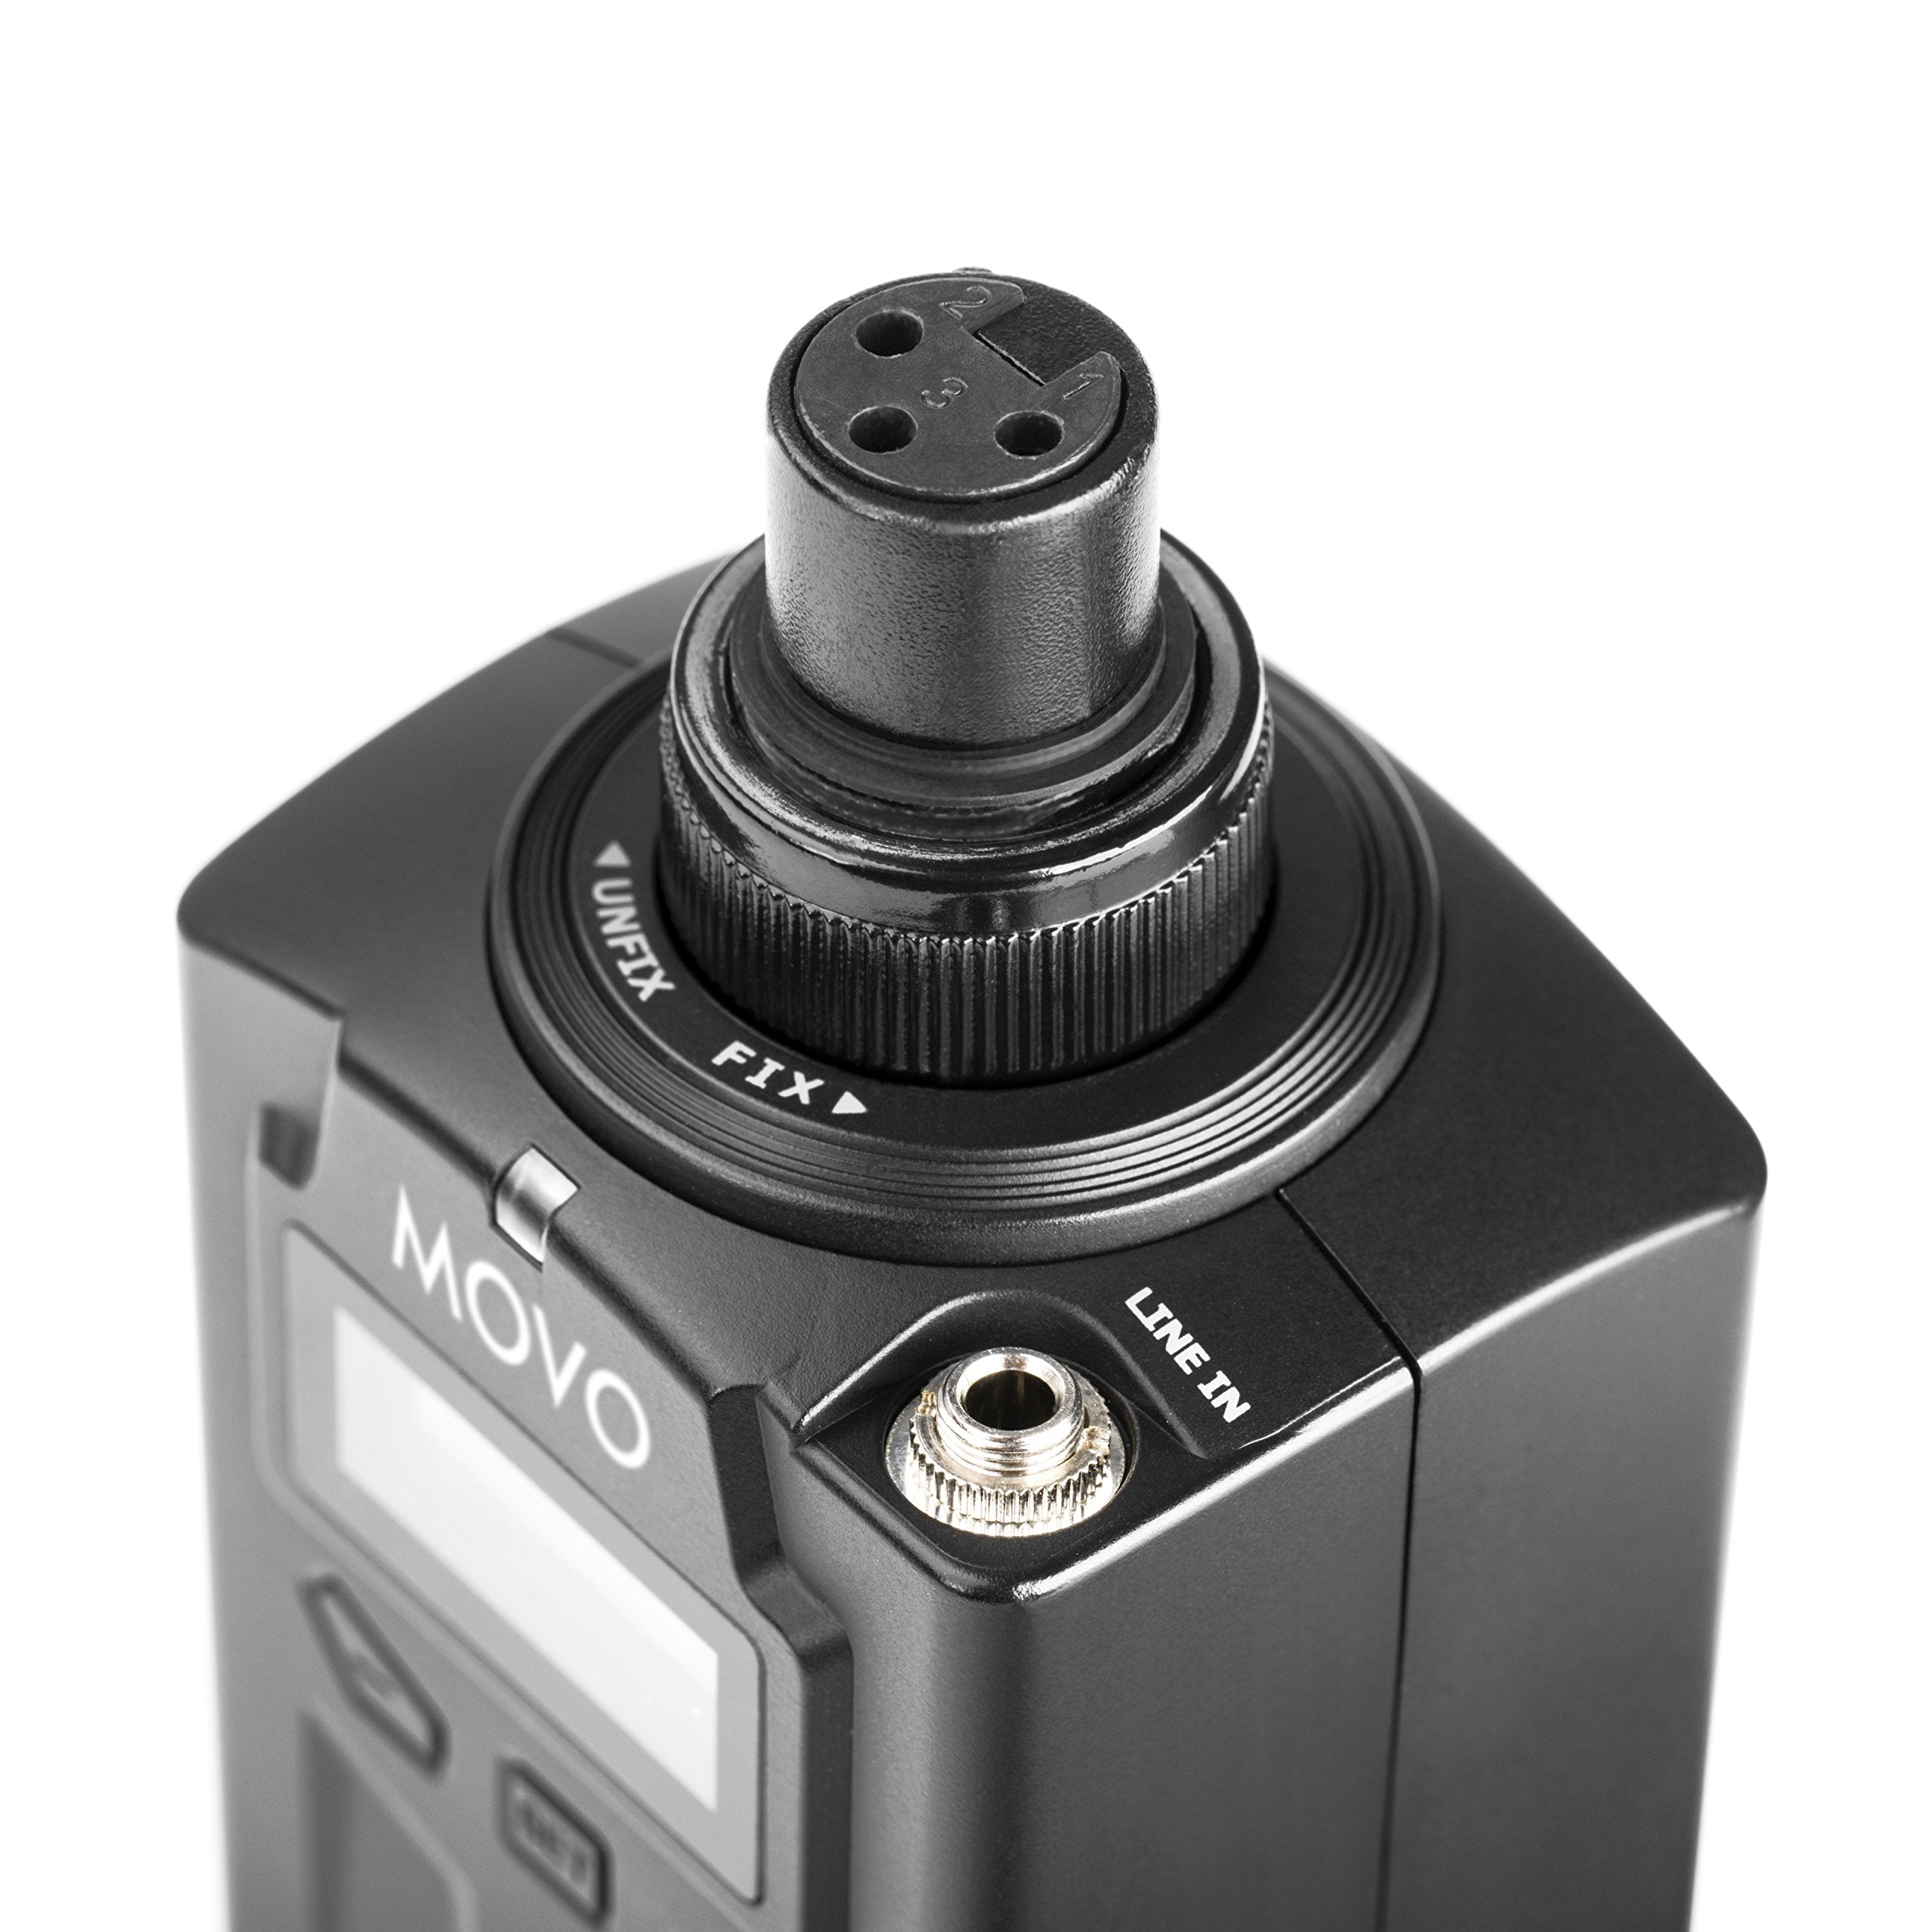 Movo WXLR8 48-Channel UHF Wireless XLR Plug-in Microphone Transmitter for The WMIC80 Wireless System  - Very Good